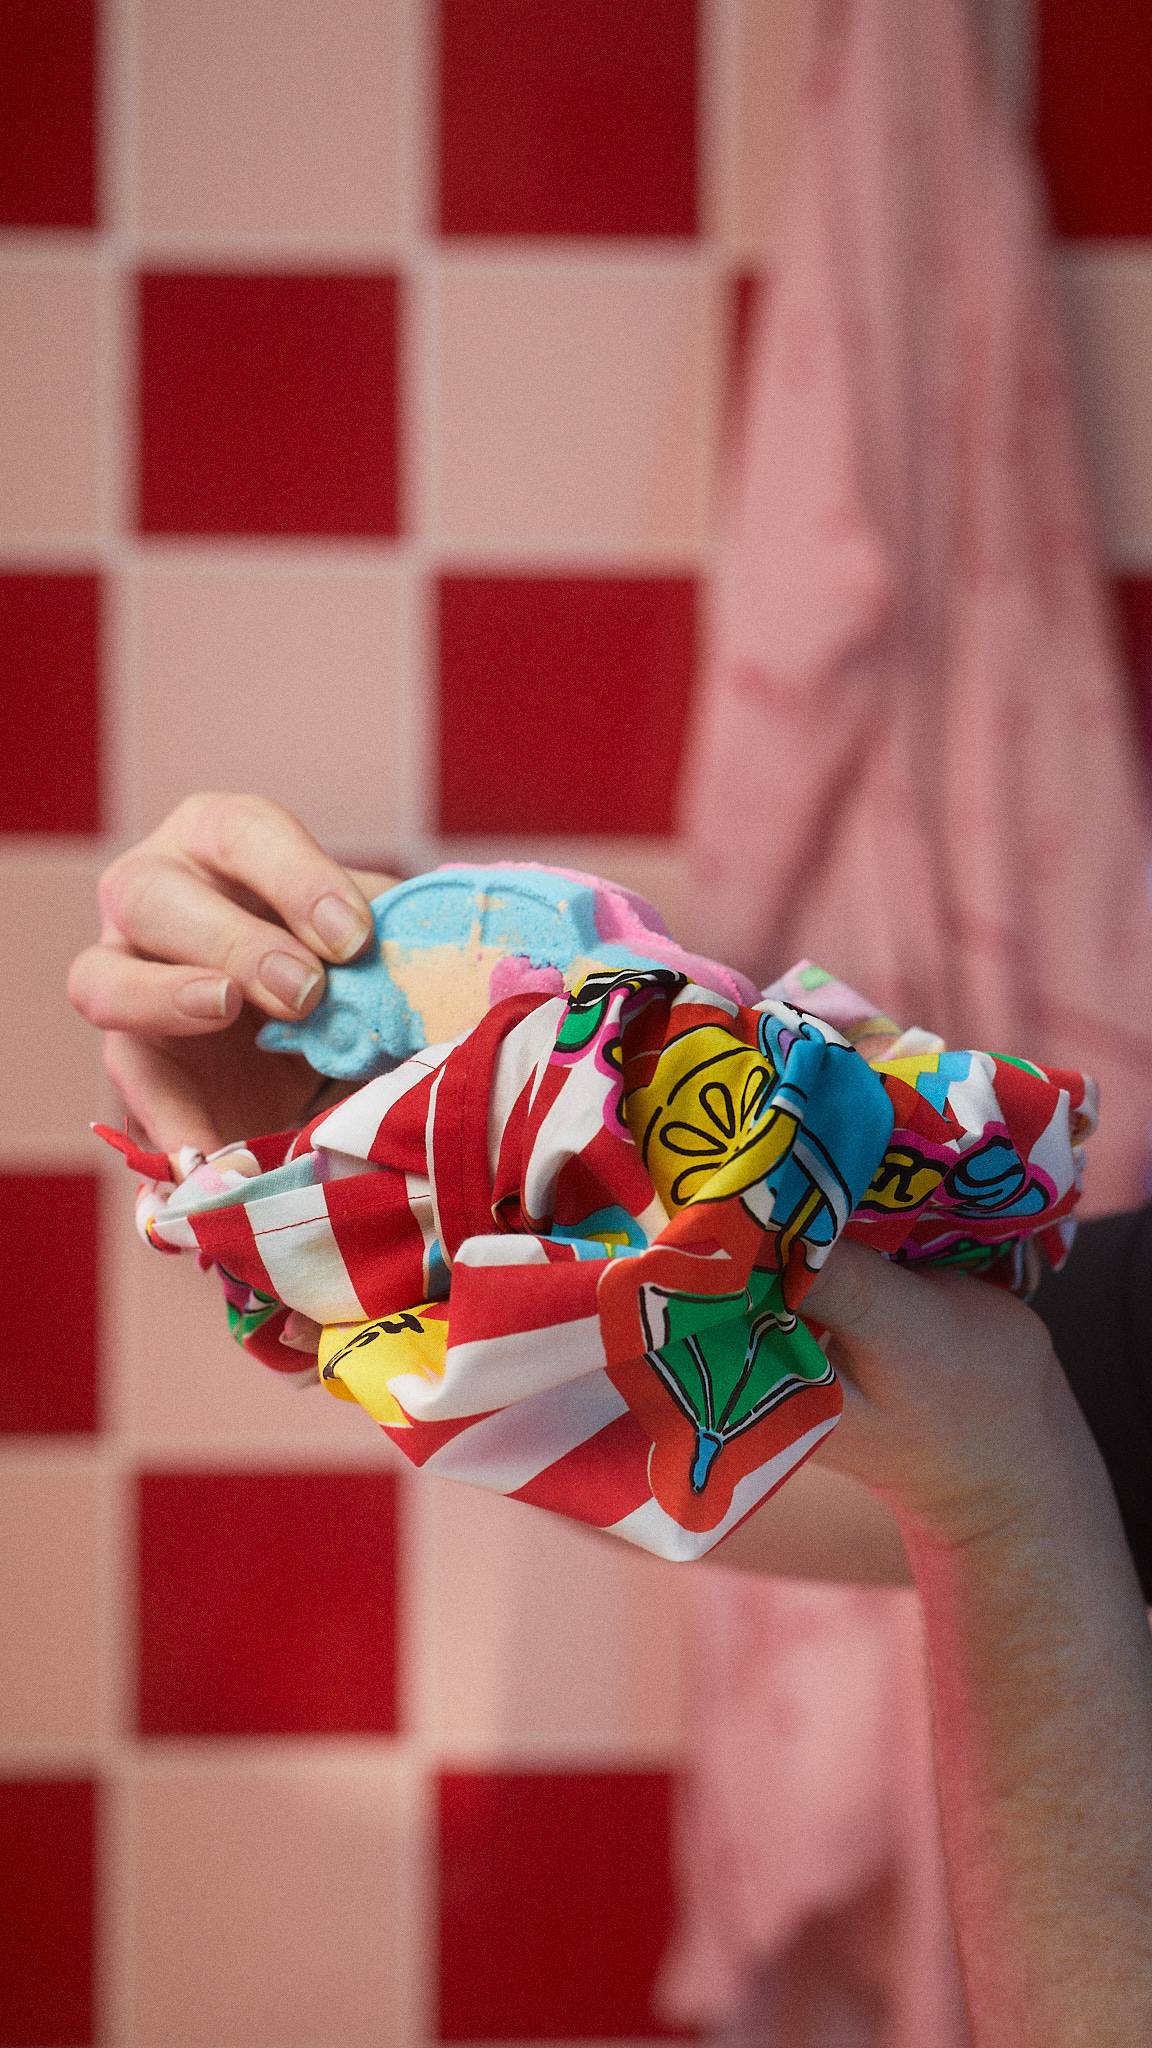 The image shows a close-up of the model holding the Lush bath bomb half-wrapped in the bold, bright Sweets For My Sweet knot wrap.